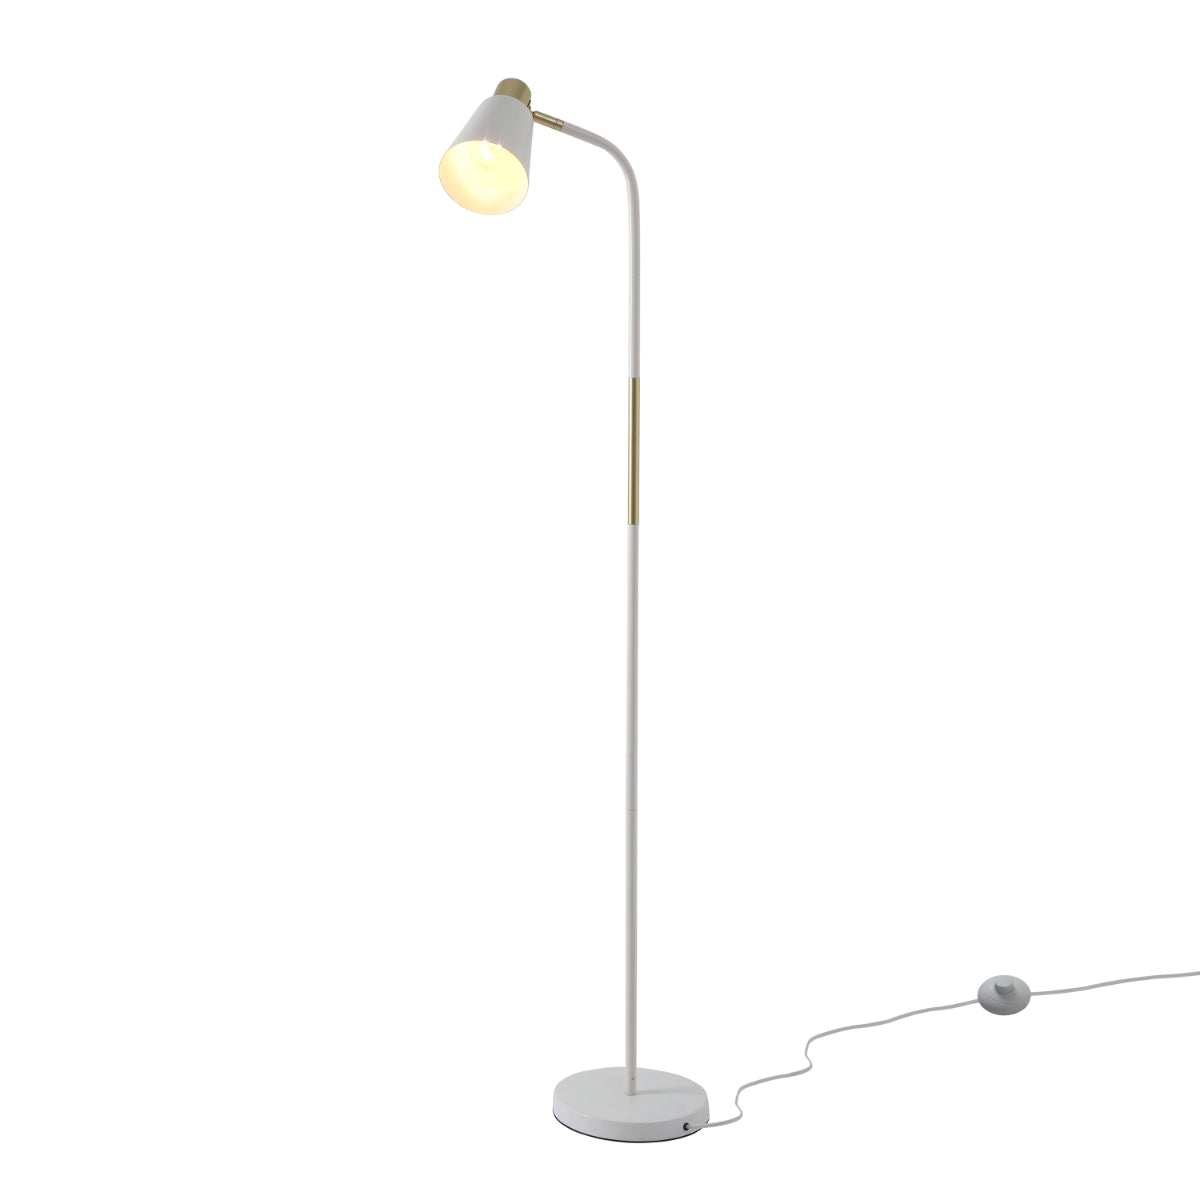 Main image of Bend Design Floor Lamp with Gold Accents - E27 130-03554